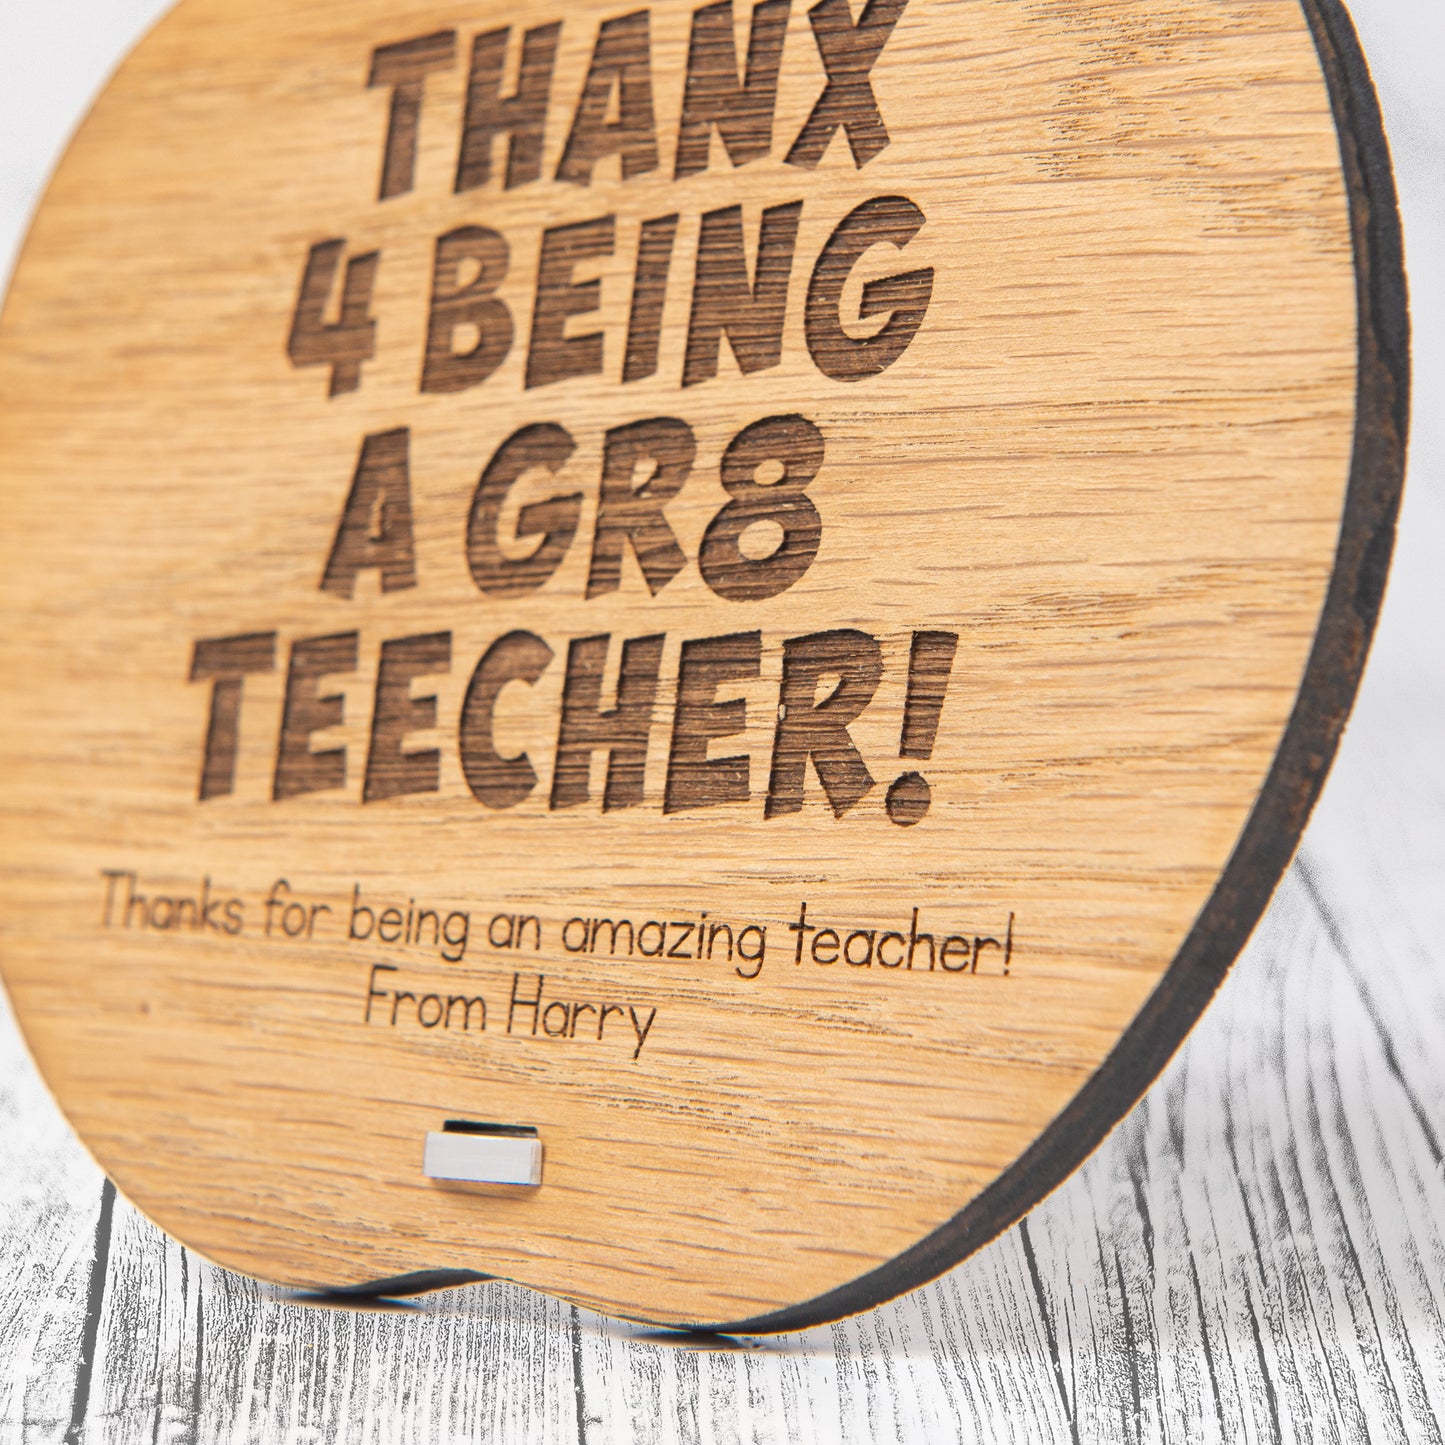 Funny Thank You Gift for Teacher - Personalised Spelling Mistake Sign - Humorous Apple Plaque